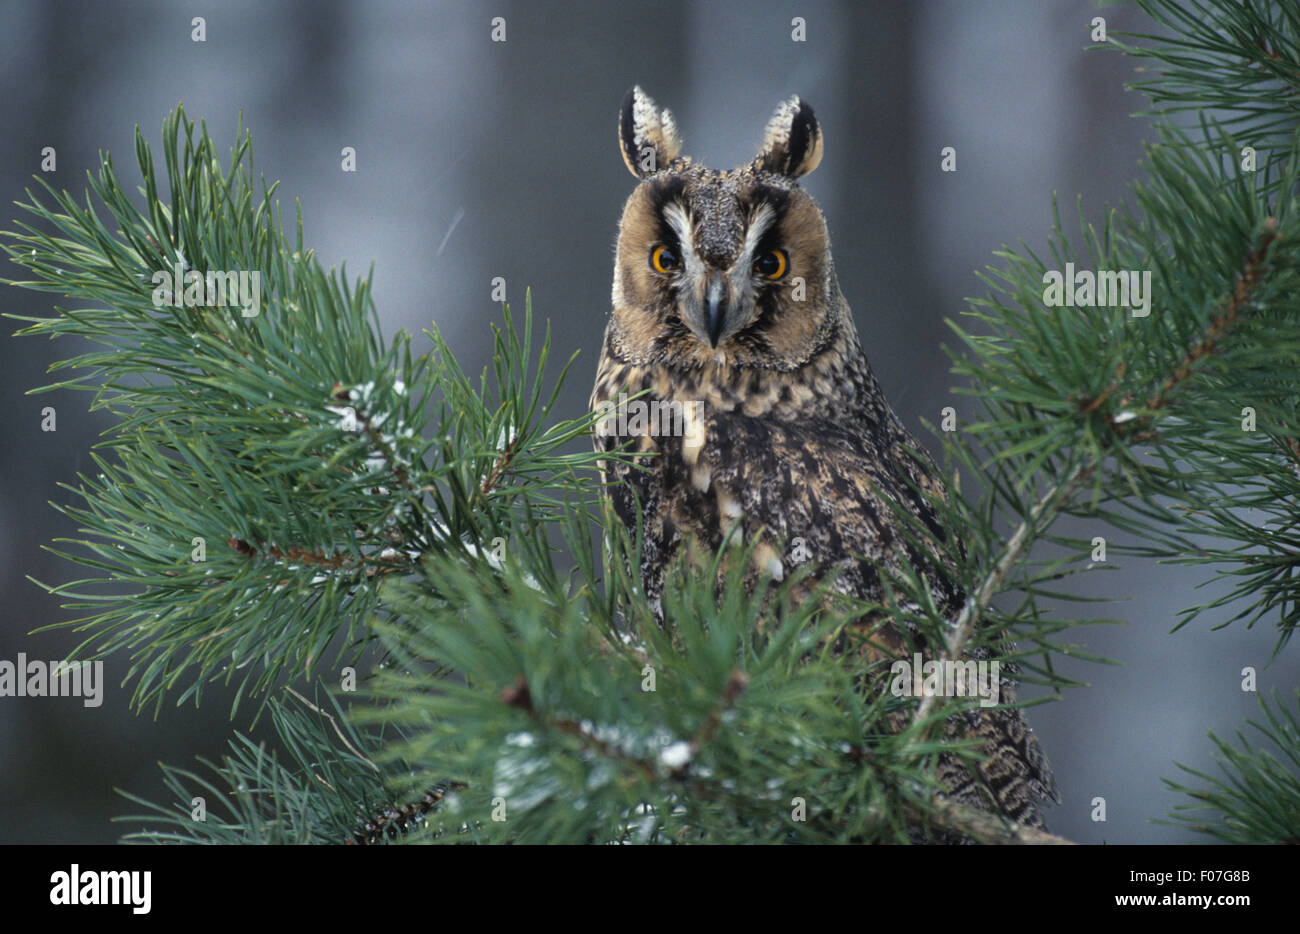 Long Eared Owl taken from front looking into camera ears raised eyes wide open looking out from behind fir covered in snow Stock Photo